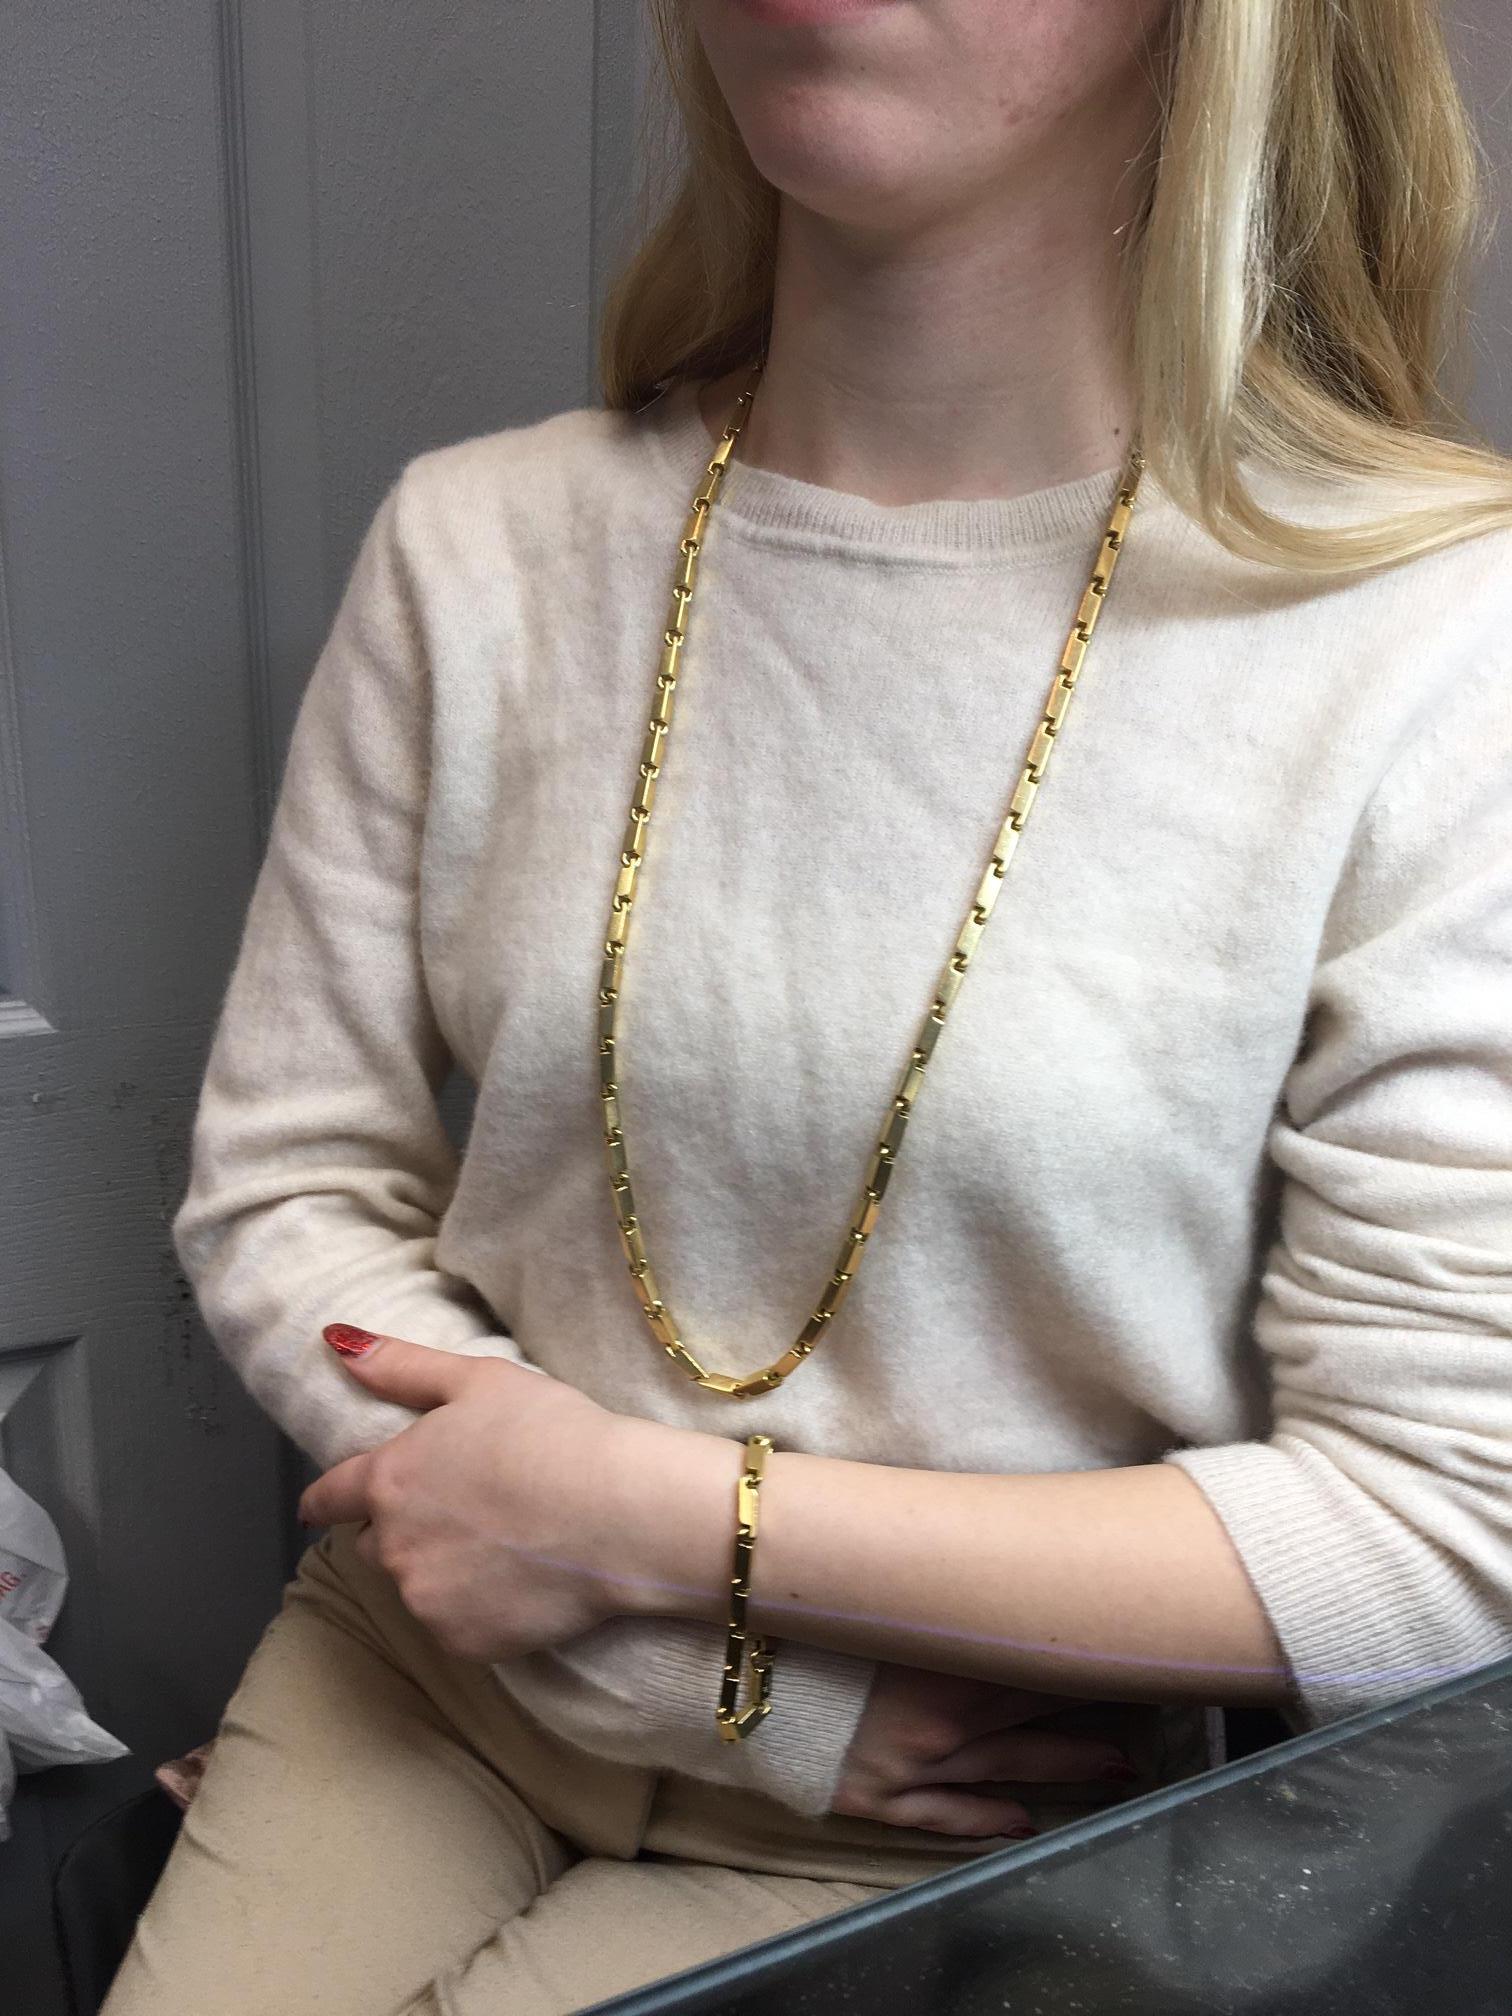 Pomellato 18 Karat Long Link Chain Necklace Bracelet Combination In Excellent Condition For Sale In New York, NY